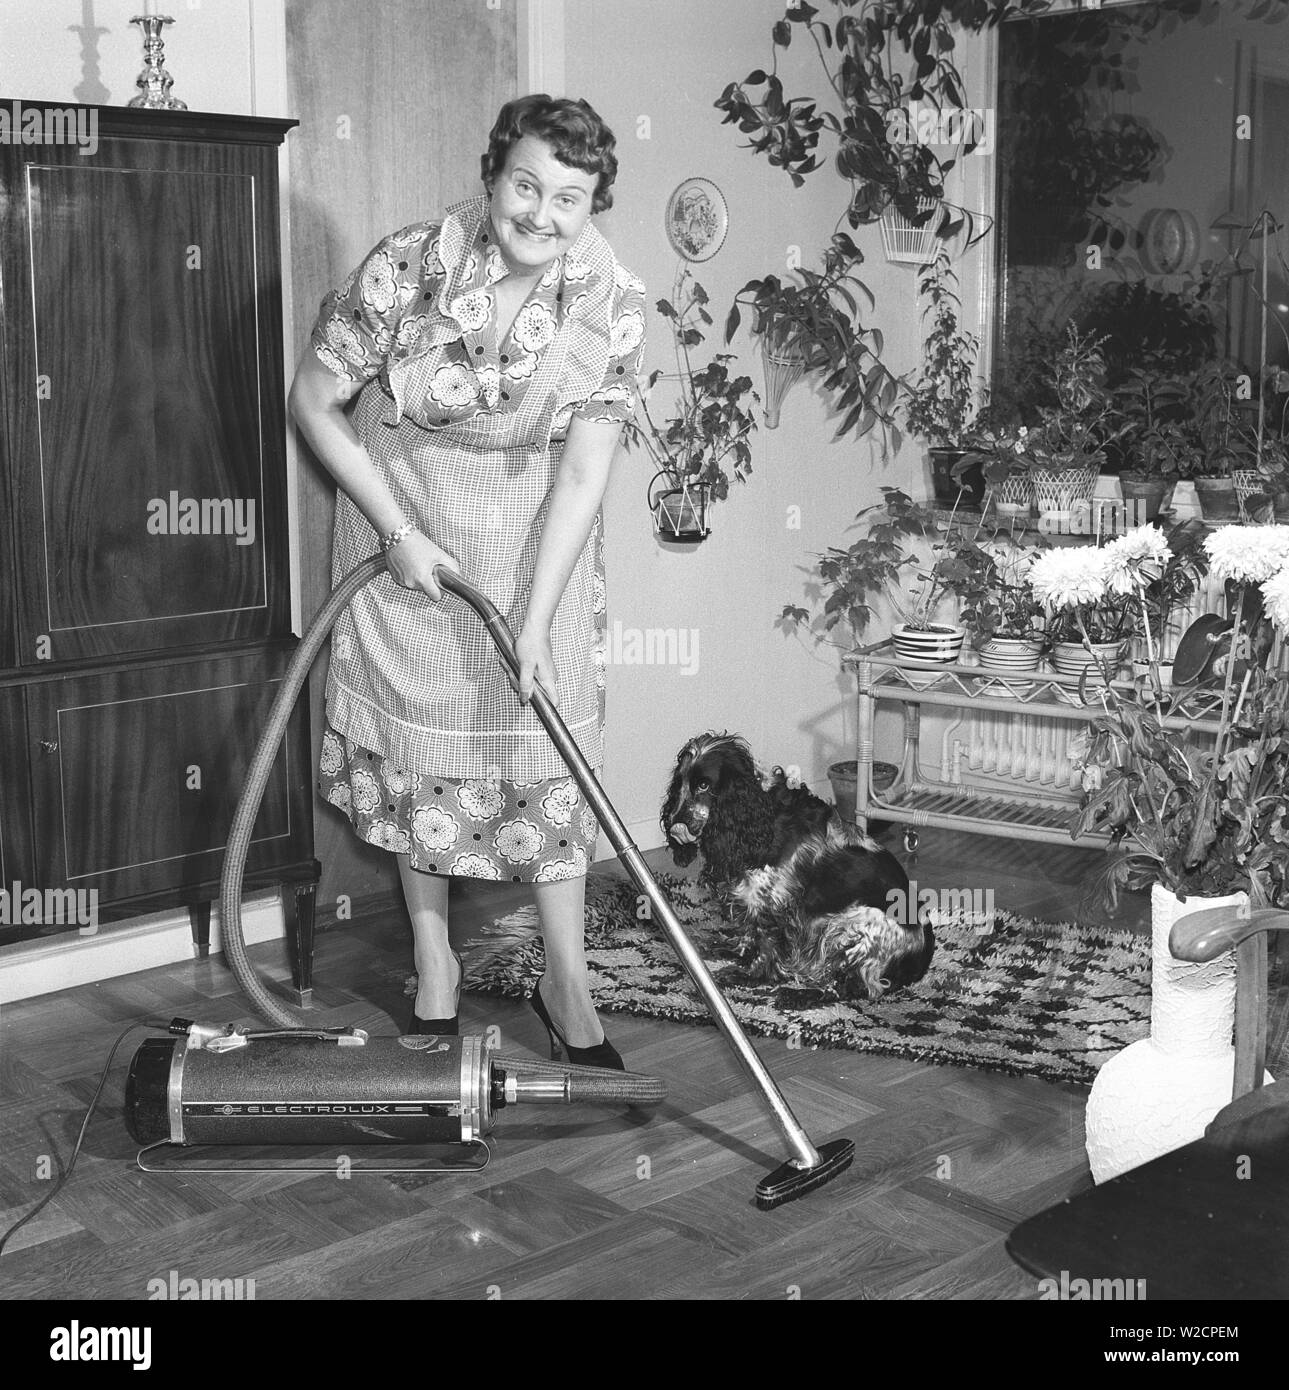 Cleaning day in the 1950s. A housewife is vacuuming the floor using the latest model from Electrolux. Her dog is sitting on a carpet beside her.  Sweden 1958 Kristoffersson ref CC59-1 Stock Photo